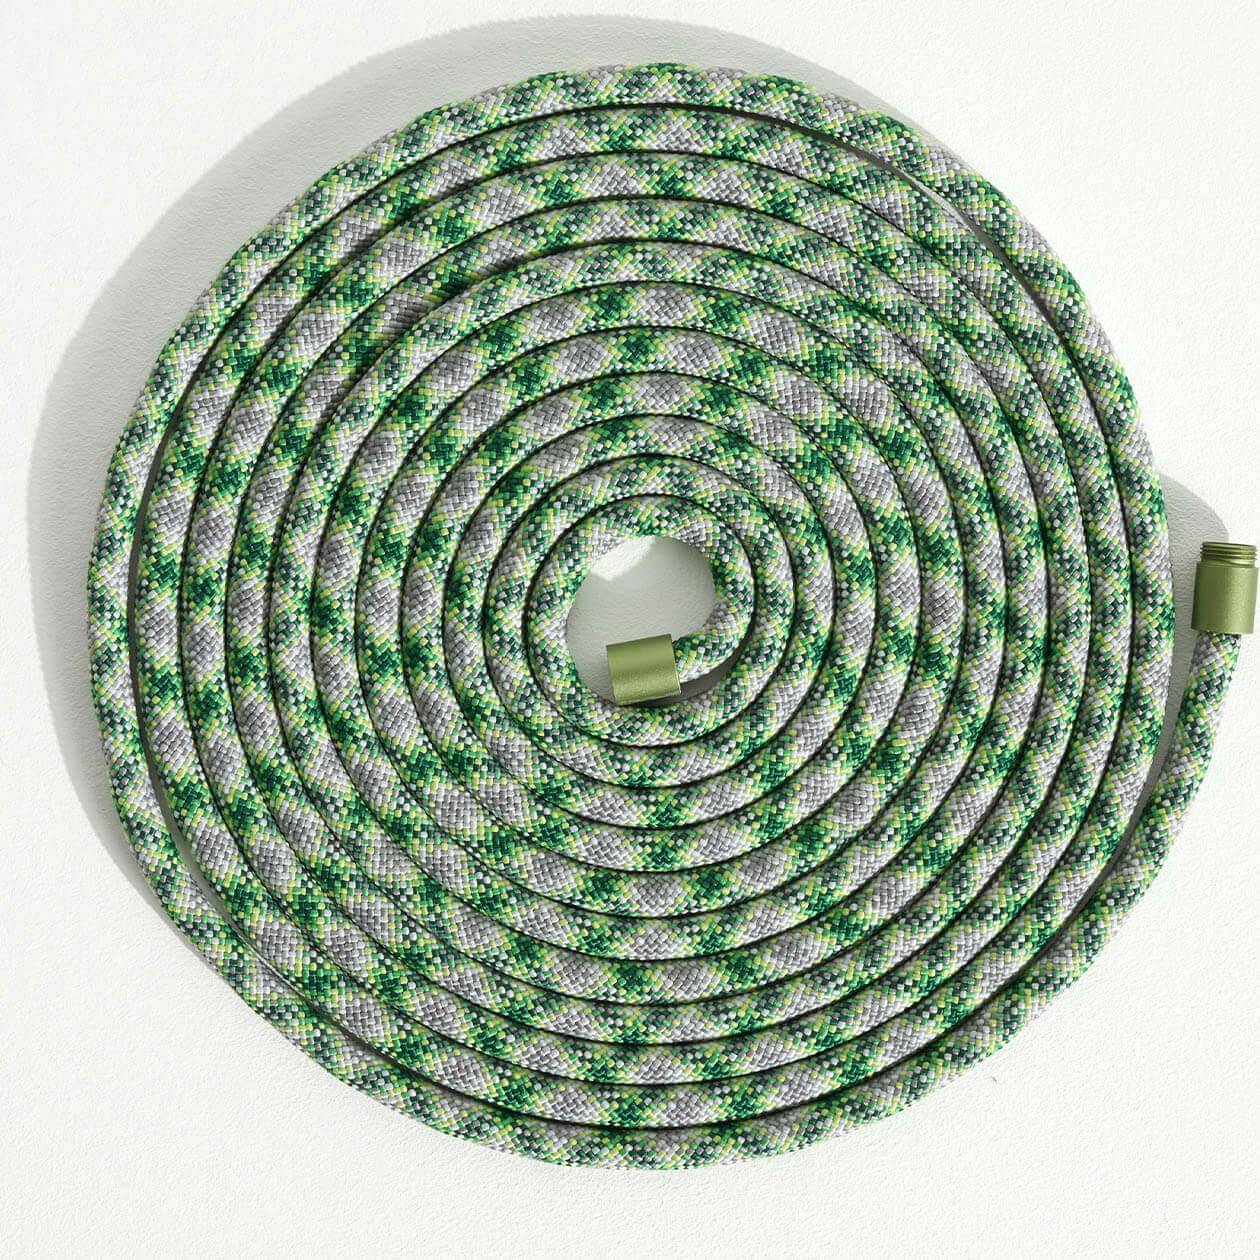 Wireless lamp Quasar olive green - rope